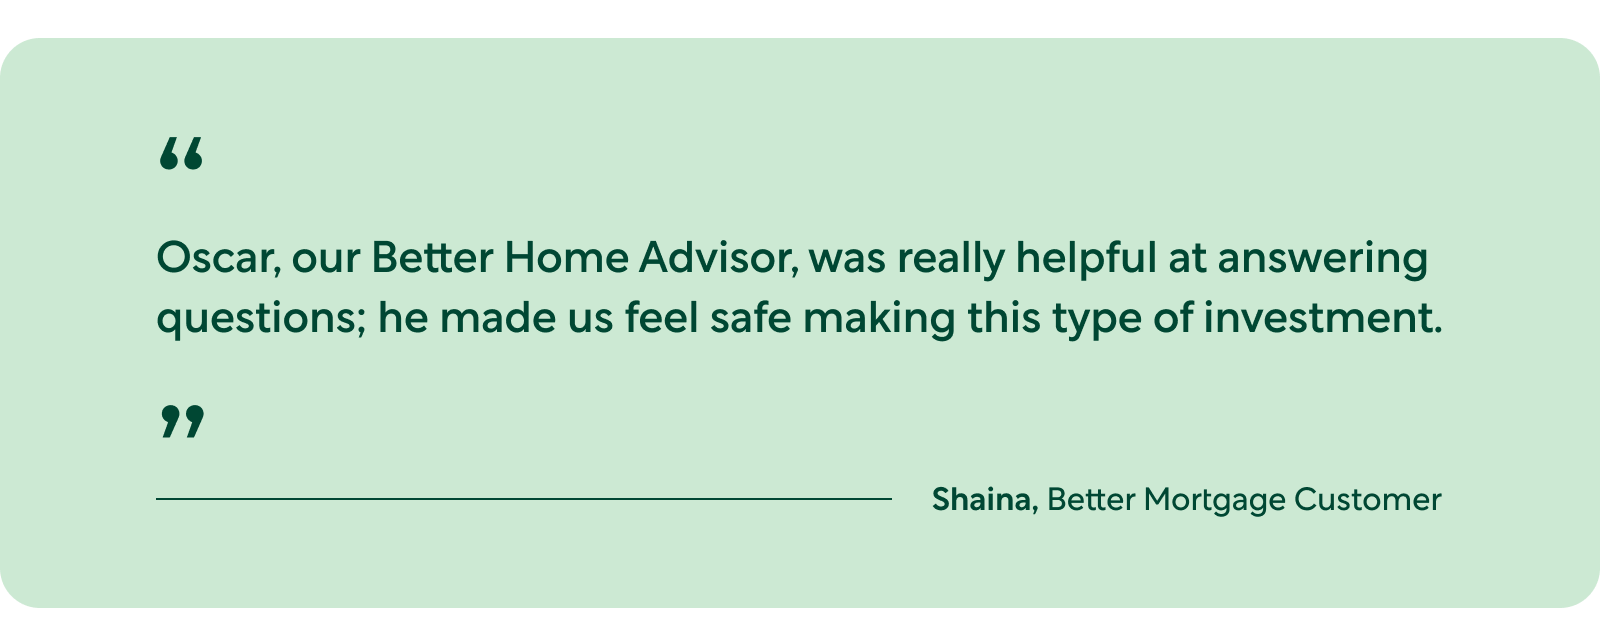 Quote by Shaina, a Better Mortgage Customer